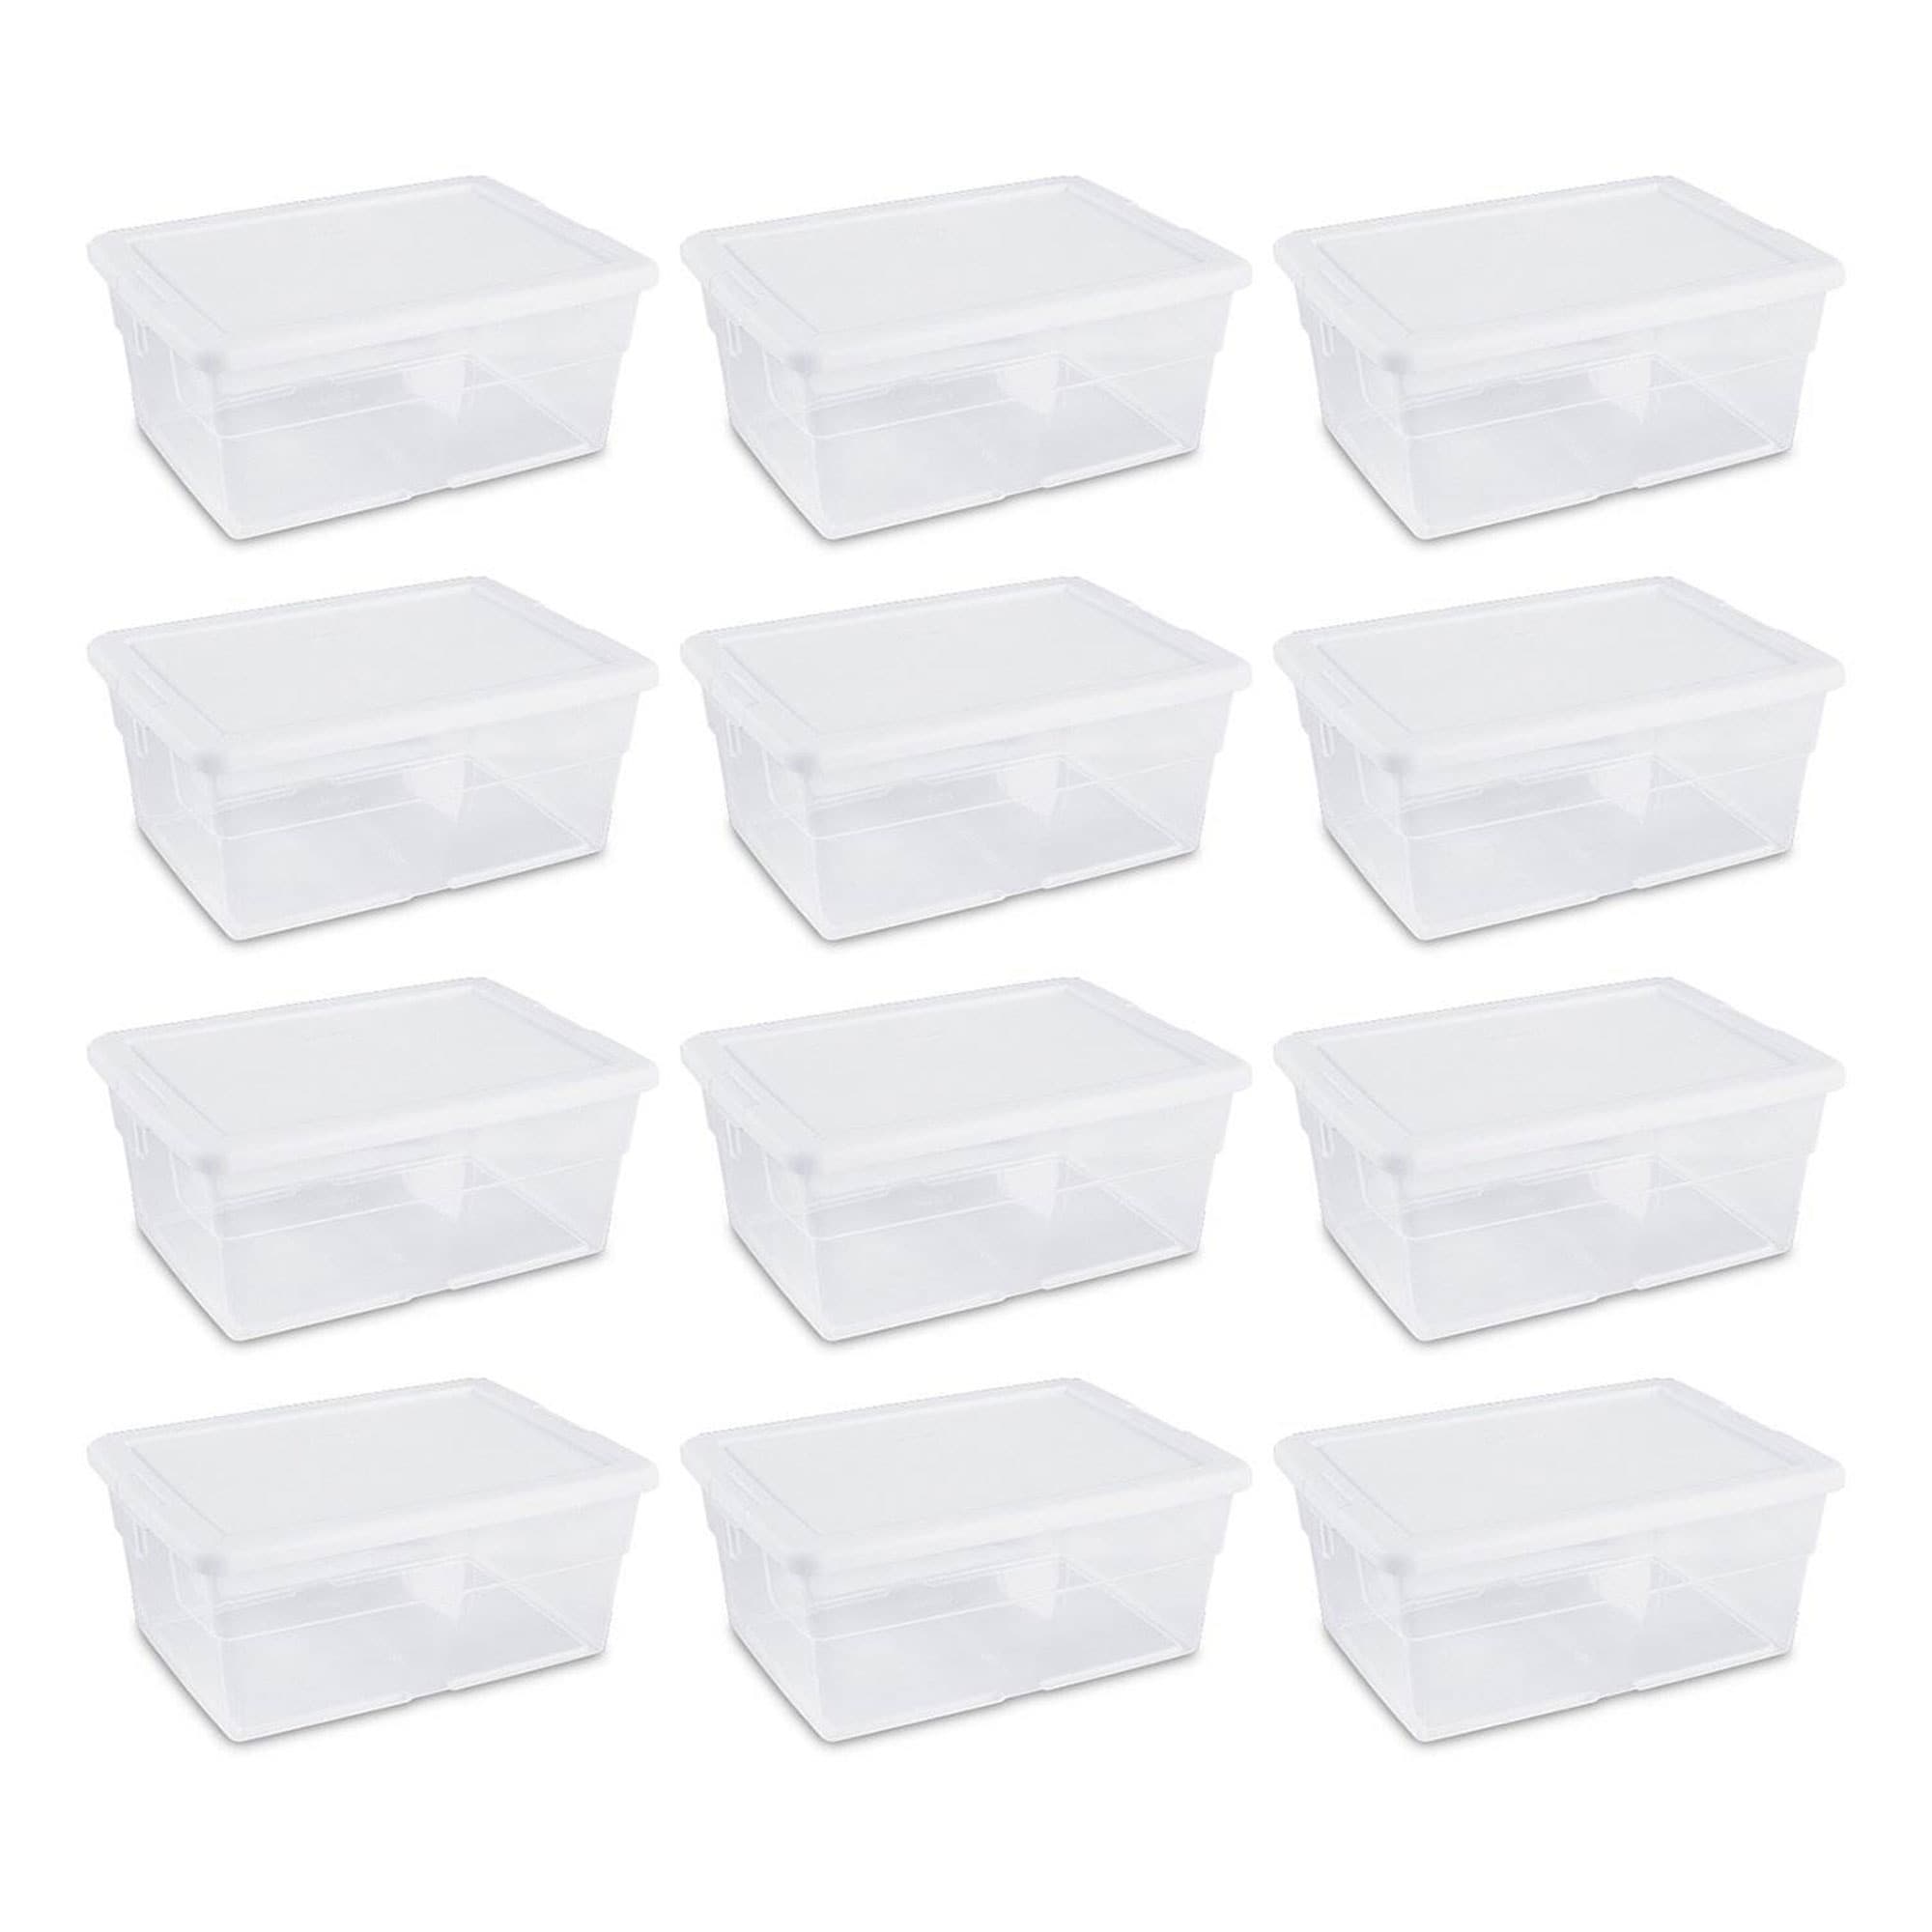 https://ak1.ostkcdn.com/images/products/is/images/direct/bed25a747849911cd9affdf6aa24aaeaa9354c3c/Sterilite-16-Quart-Clear-Plastic-Stacking-Storage-Container-Box-%2812-Pack%29.jpg